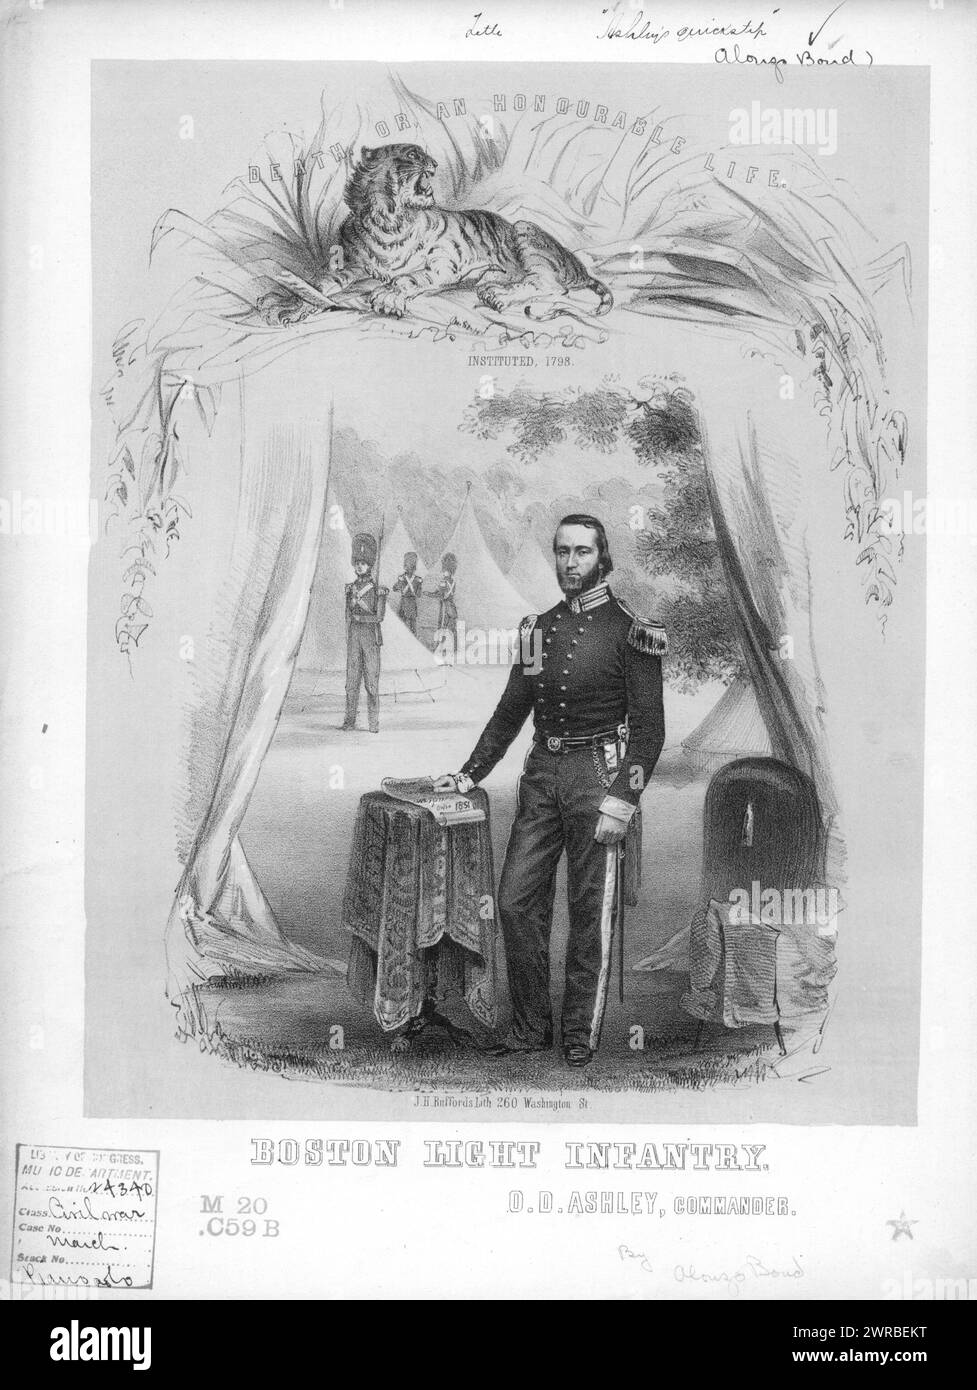 Ashley's quick step, Bond, Alonzo (composer), Oliver Ditson, Boston., United States, History, Civil War, 1861-1865, Songs and music Stock Photo